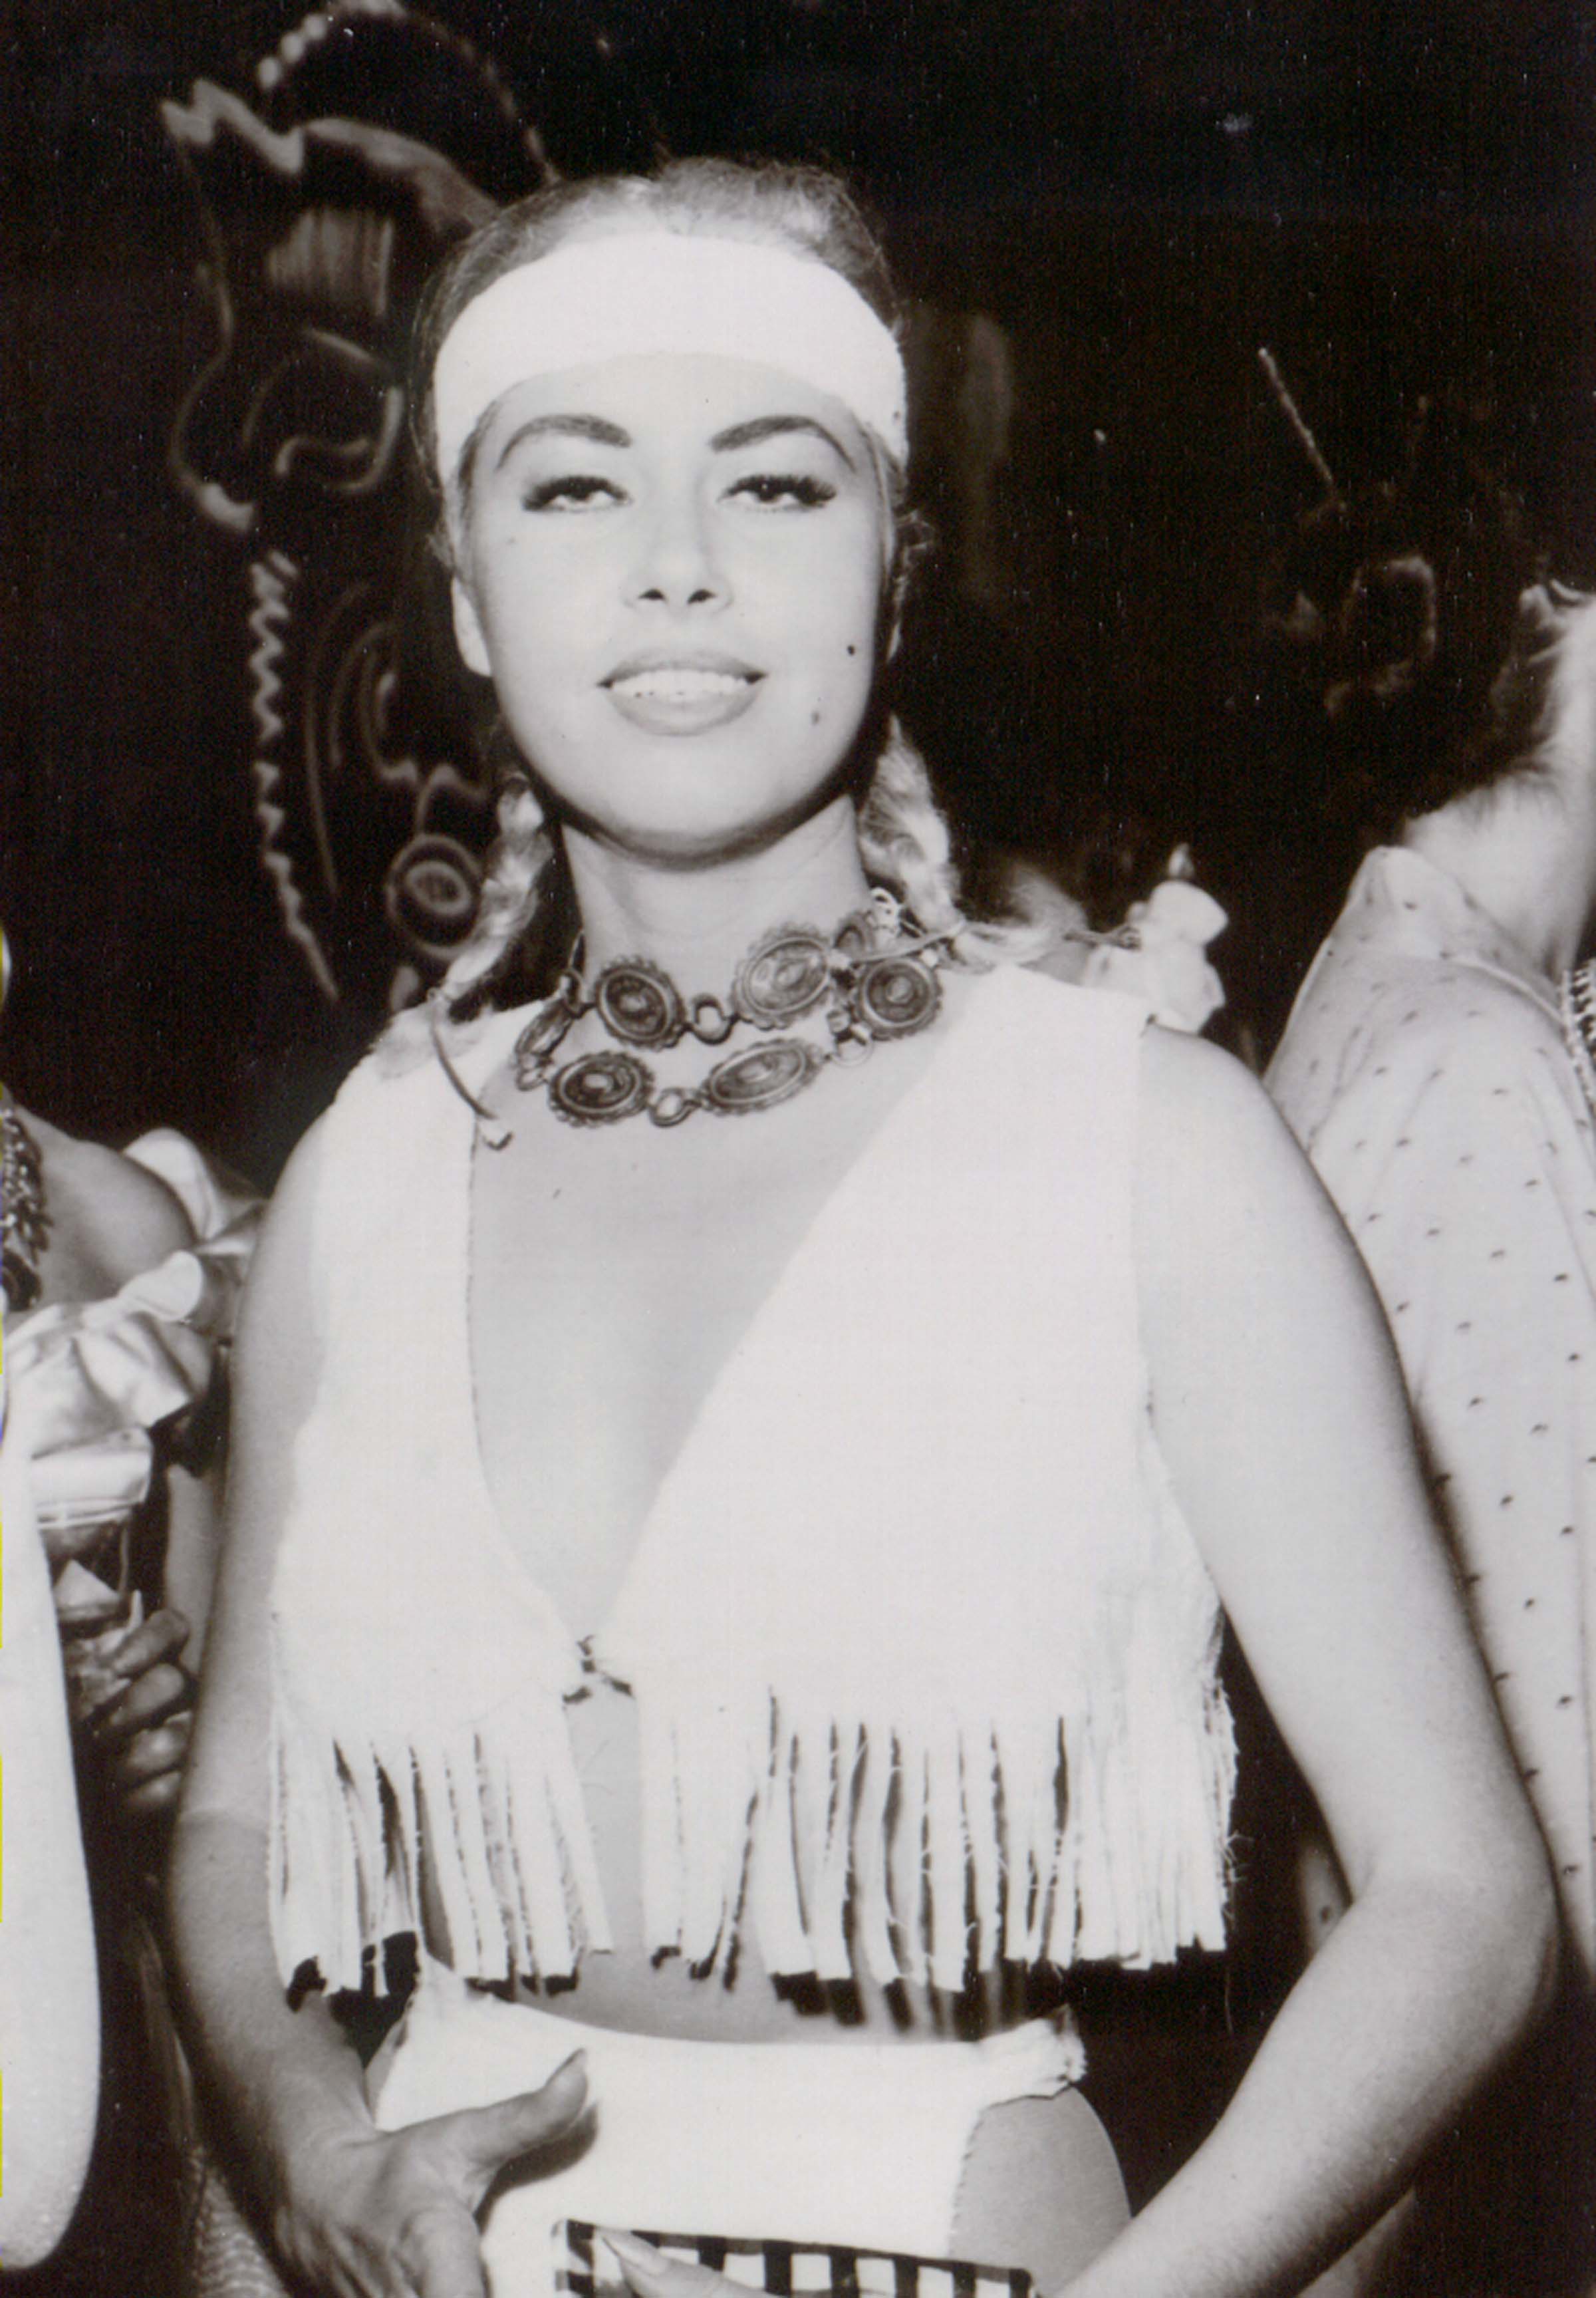 JEANNE CARMEN at SY DEVORE'S Halloween party: October 31st, 1957, Beverly Hills, California